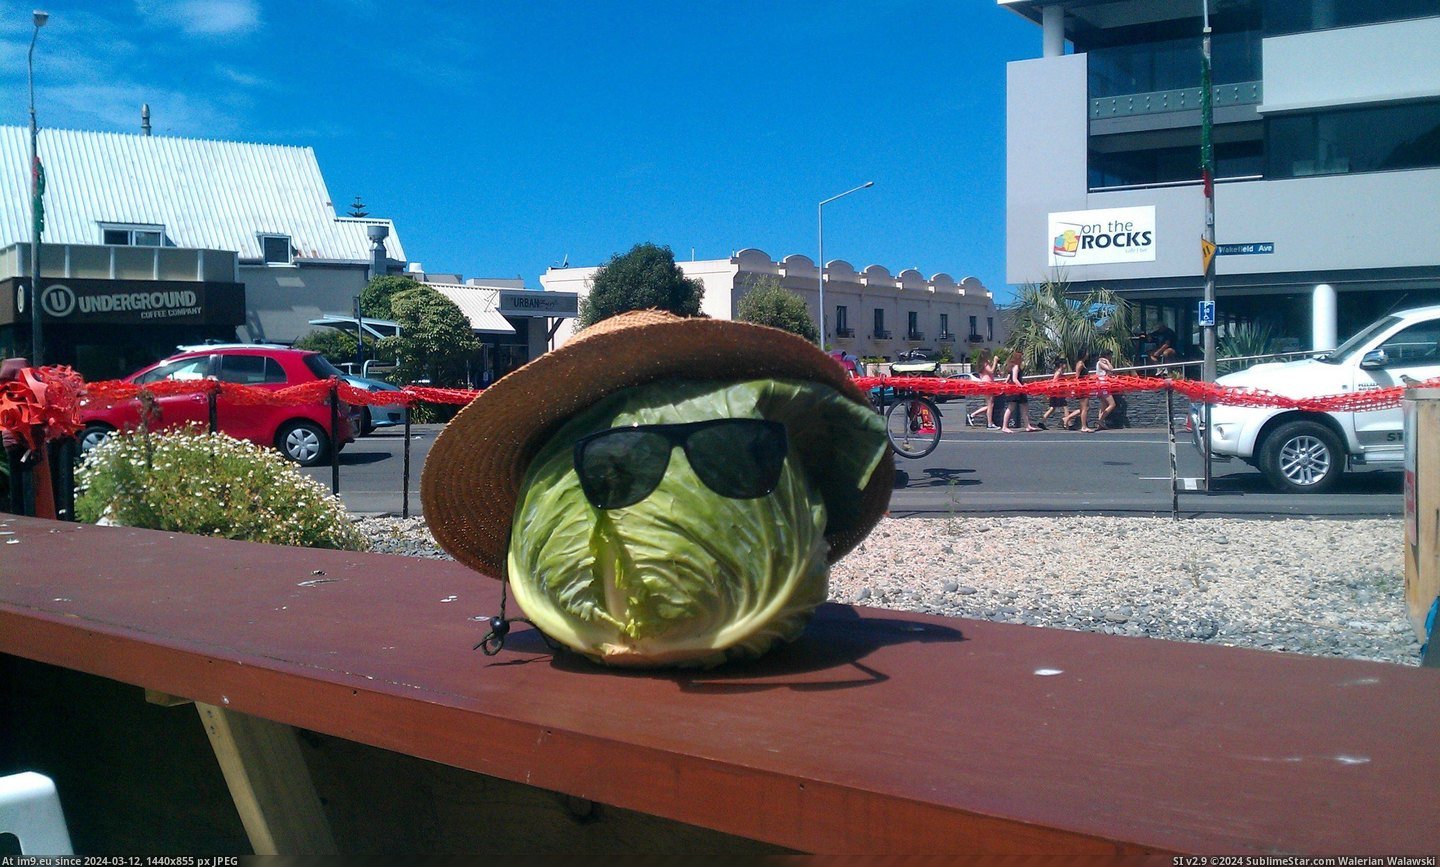 #Beach #Fun #Friends #Mad #Cabbage #Had #Wanted #Bought [Pics] None of my friends wanted to go to the beach with me so I bought a cabbage and had even more fun without them. I also mad Pic. (Bild von album My r/PICS favs))